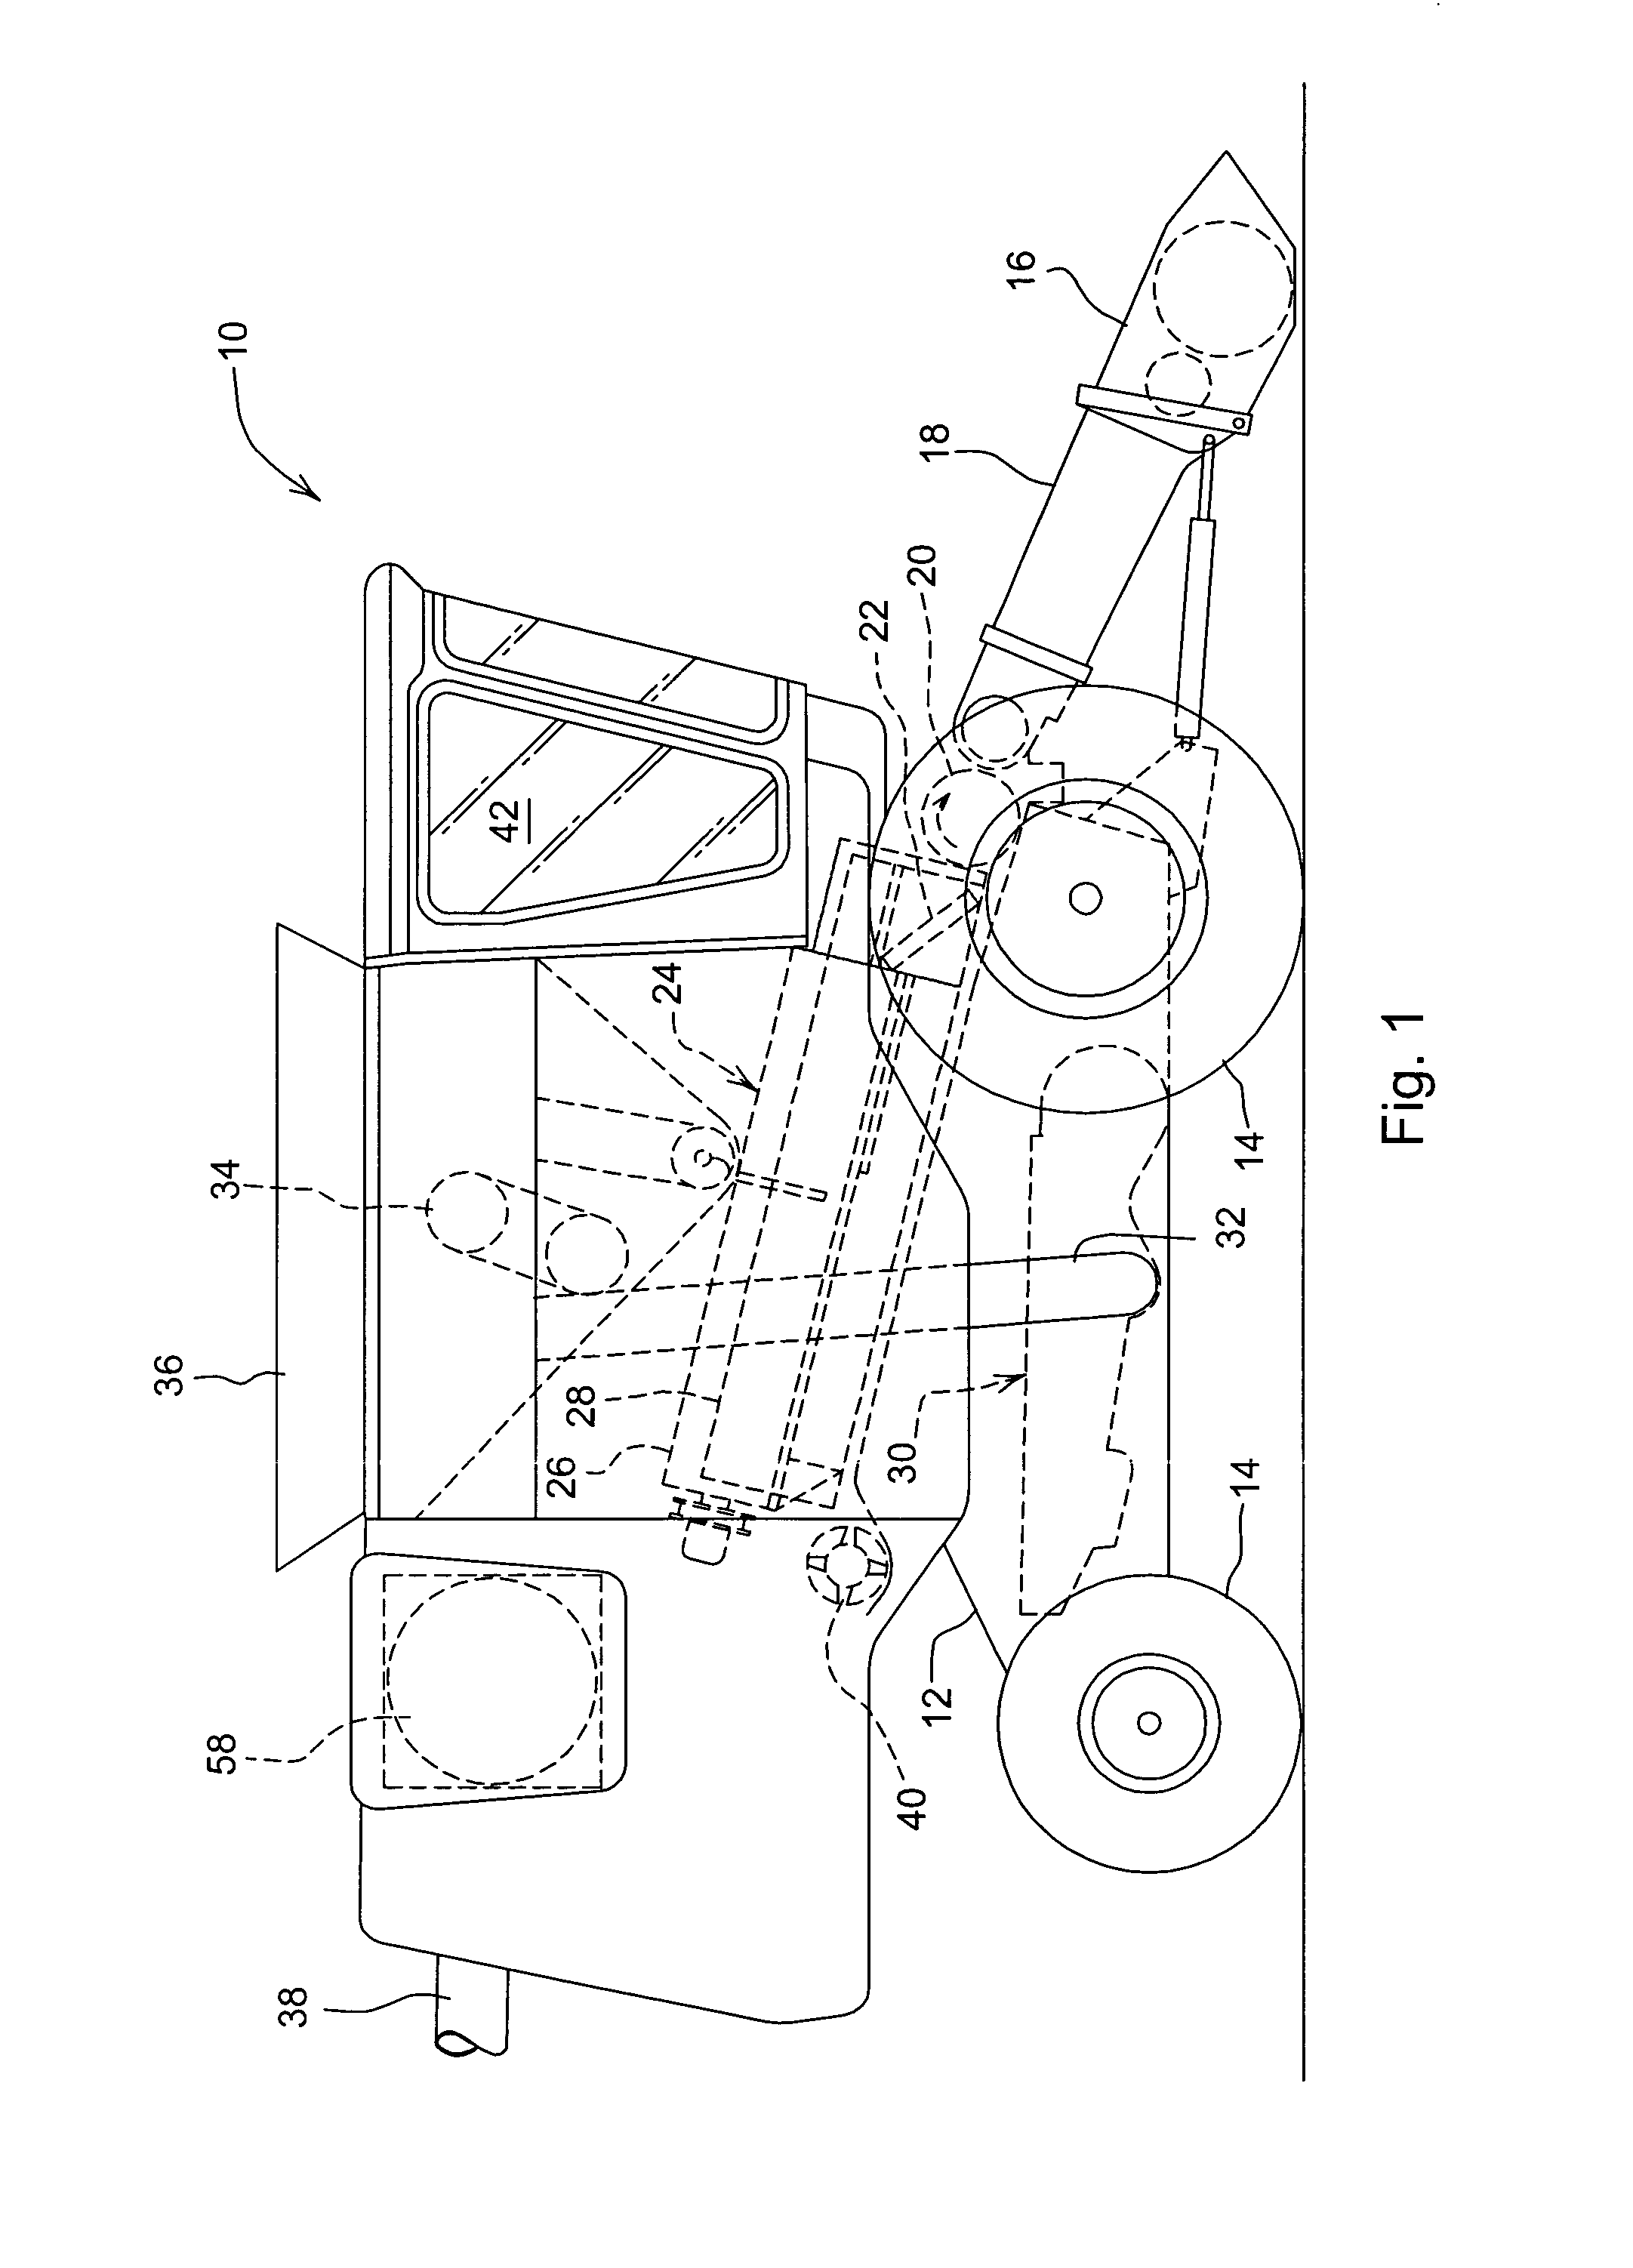 Air precleaner arrangement for an internal combustion engine comprising two cyclone filters